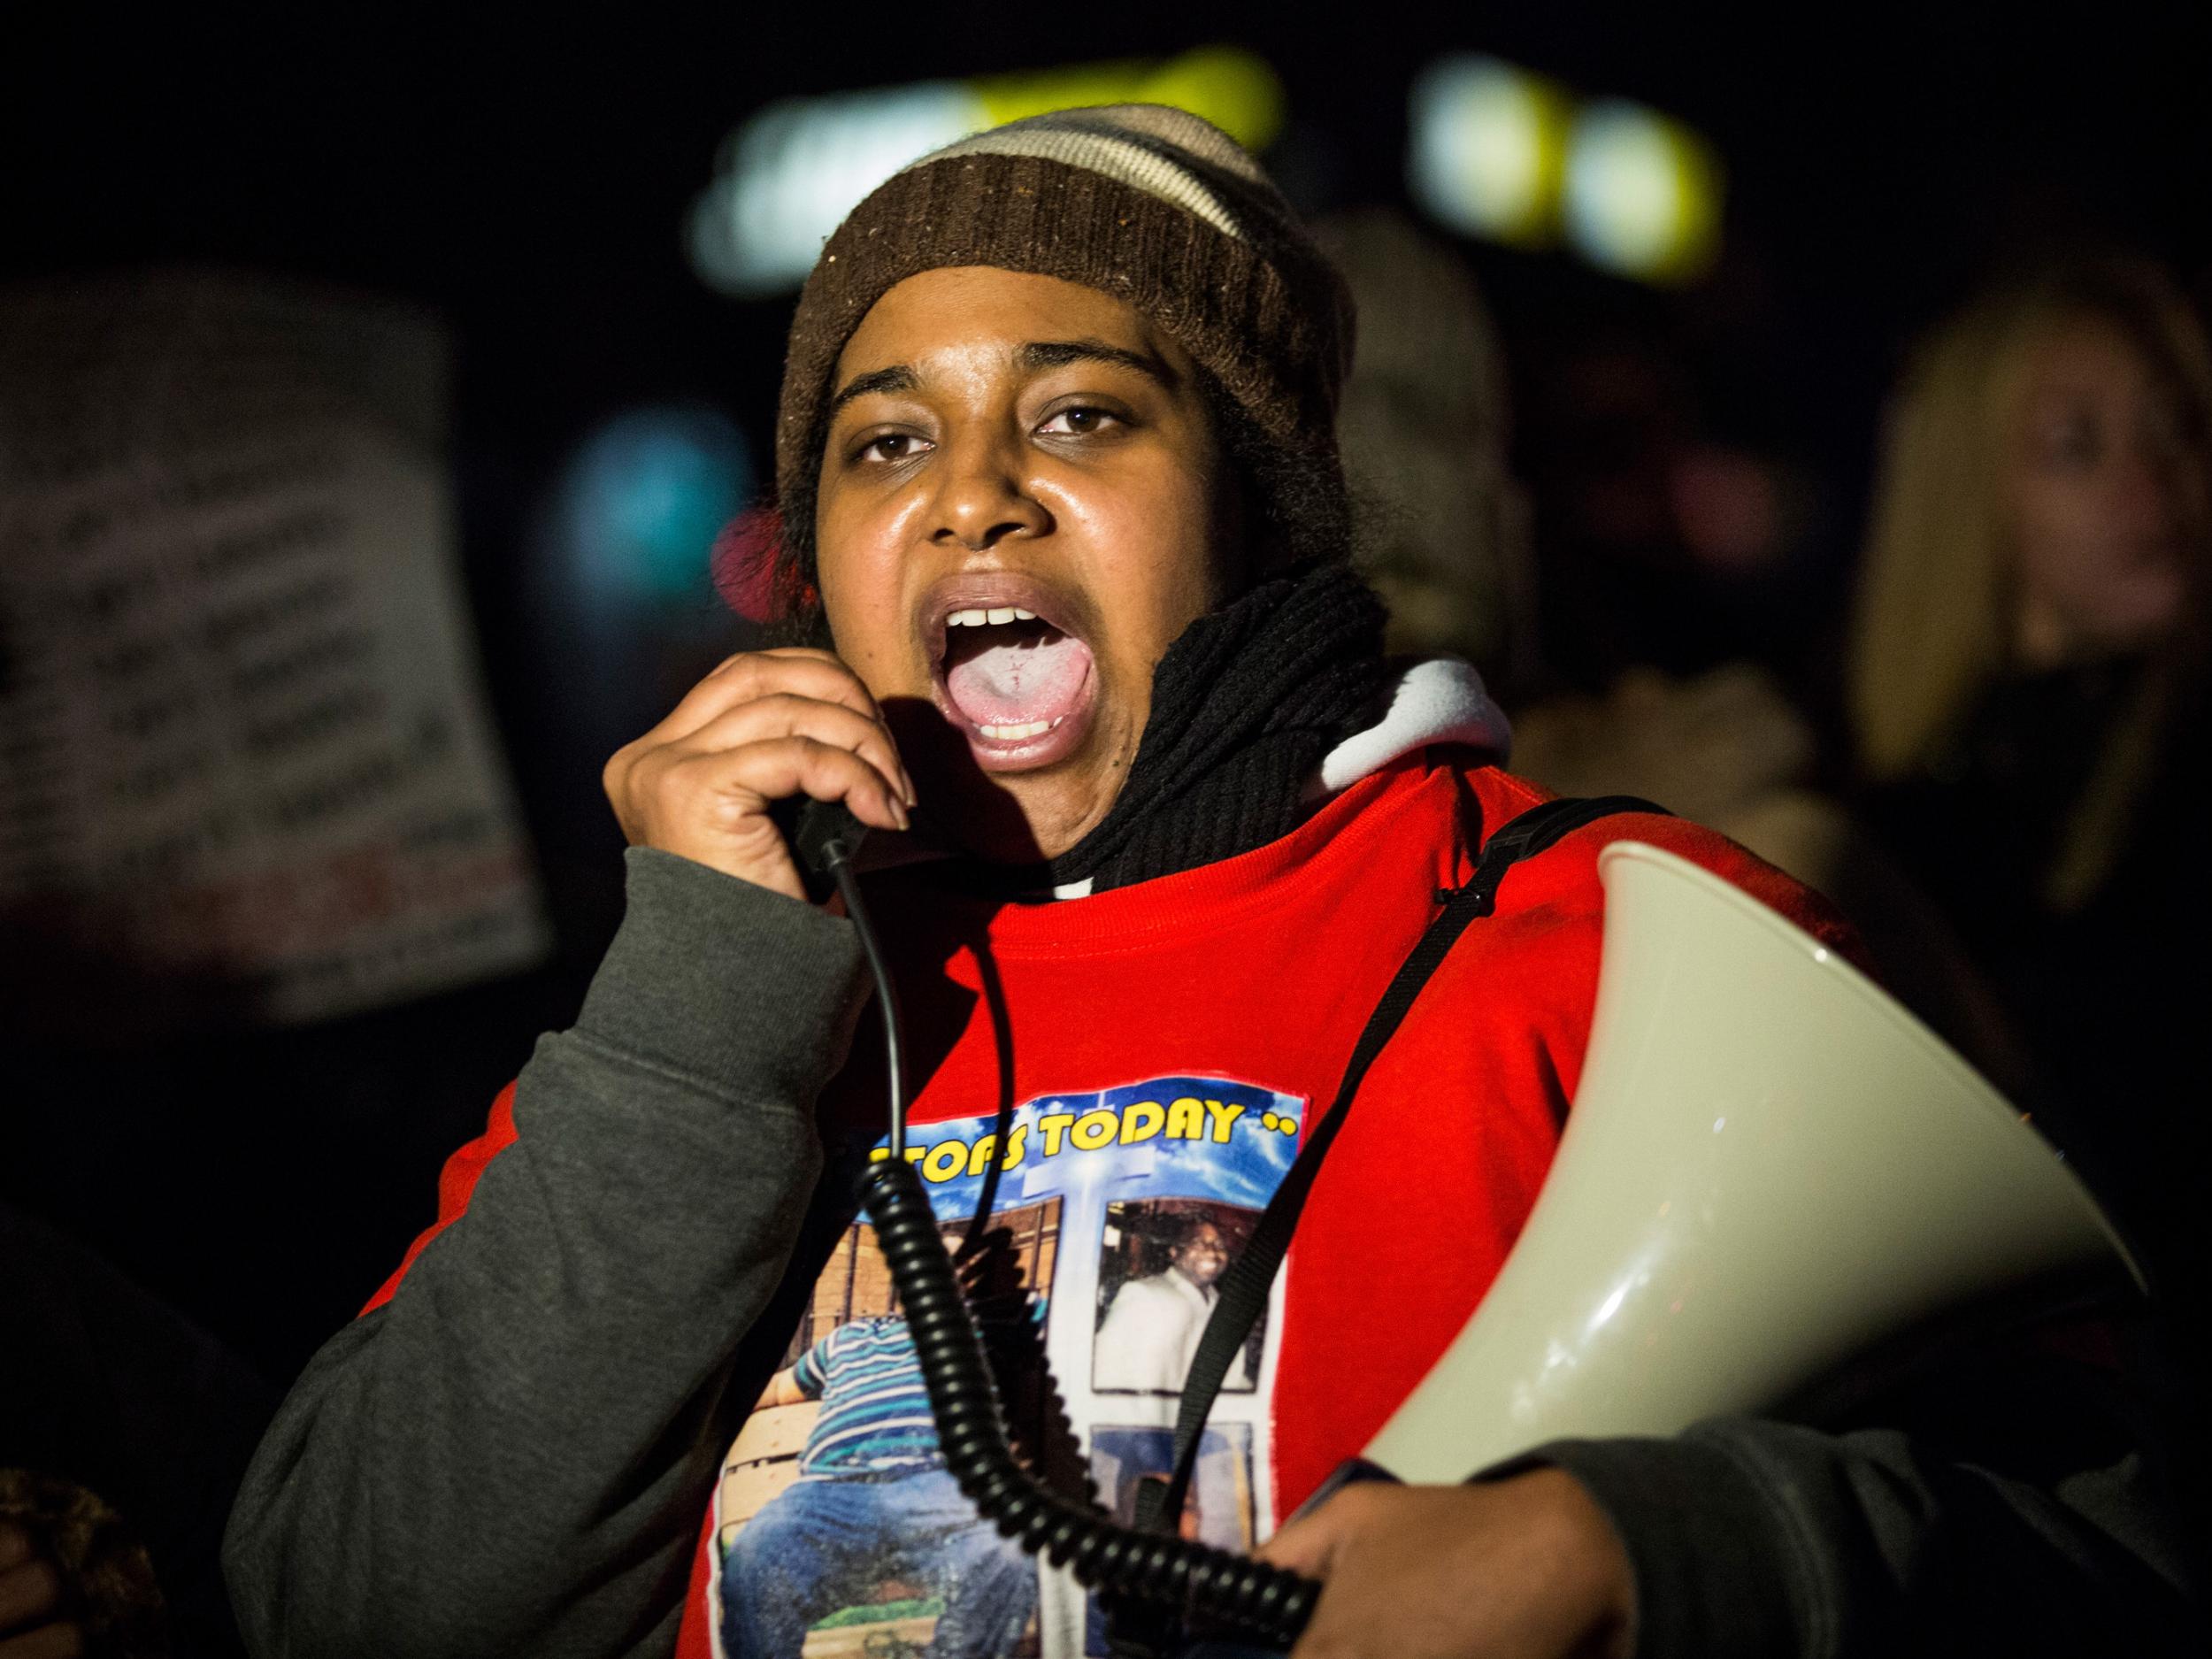 Garner would make for the spot where her father died, not just once or twice but over and over and over. She marched every Tuesday and Thursday for almost three years